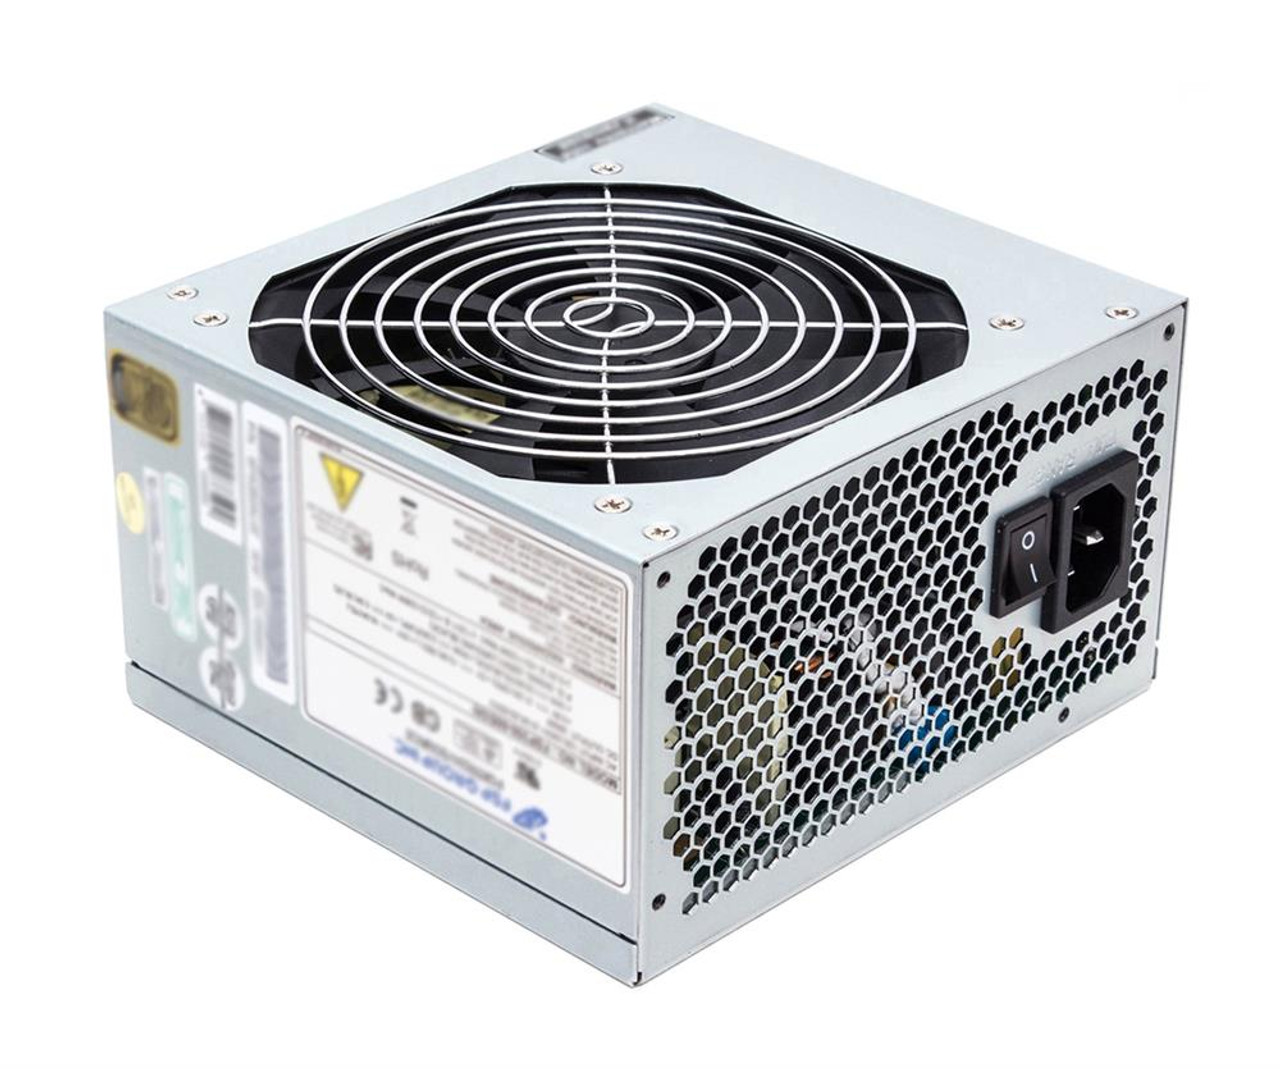 Sparkle Power 550-Watts ATX12V 2.3 Switching 80Plus Gold Power Supply with Active PFC Mfr P/N FSP550-80EGN